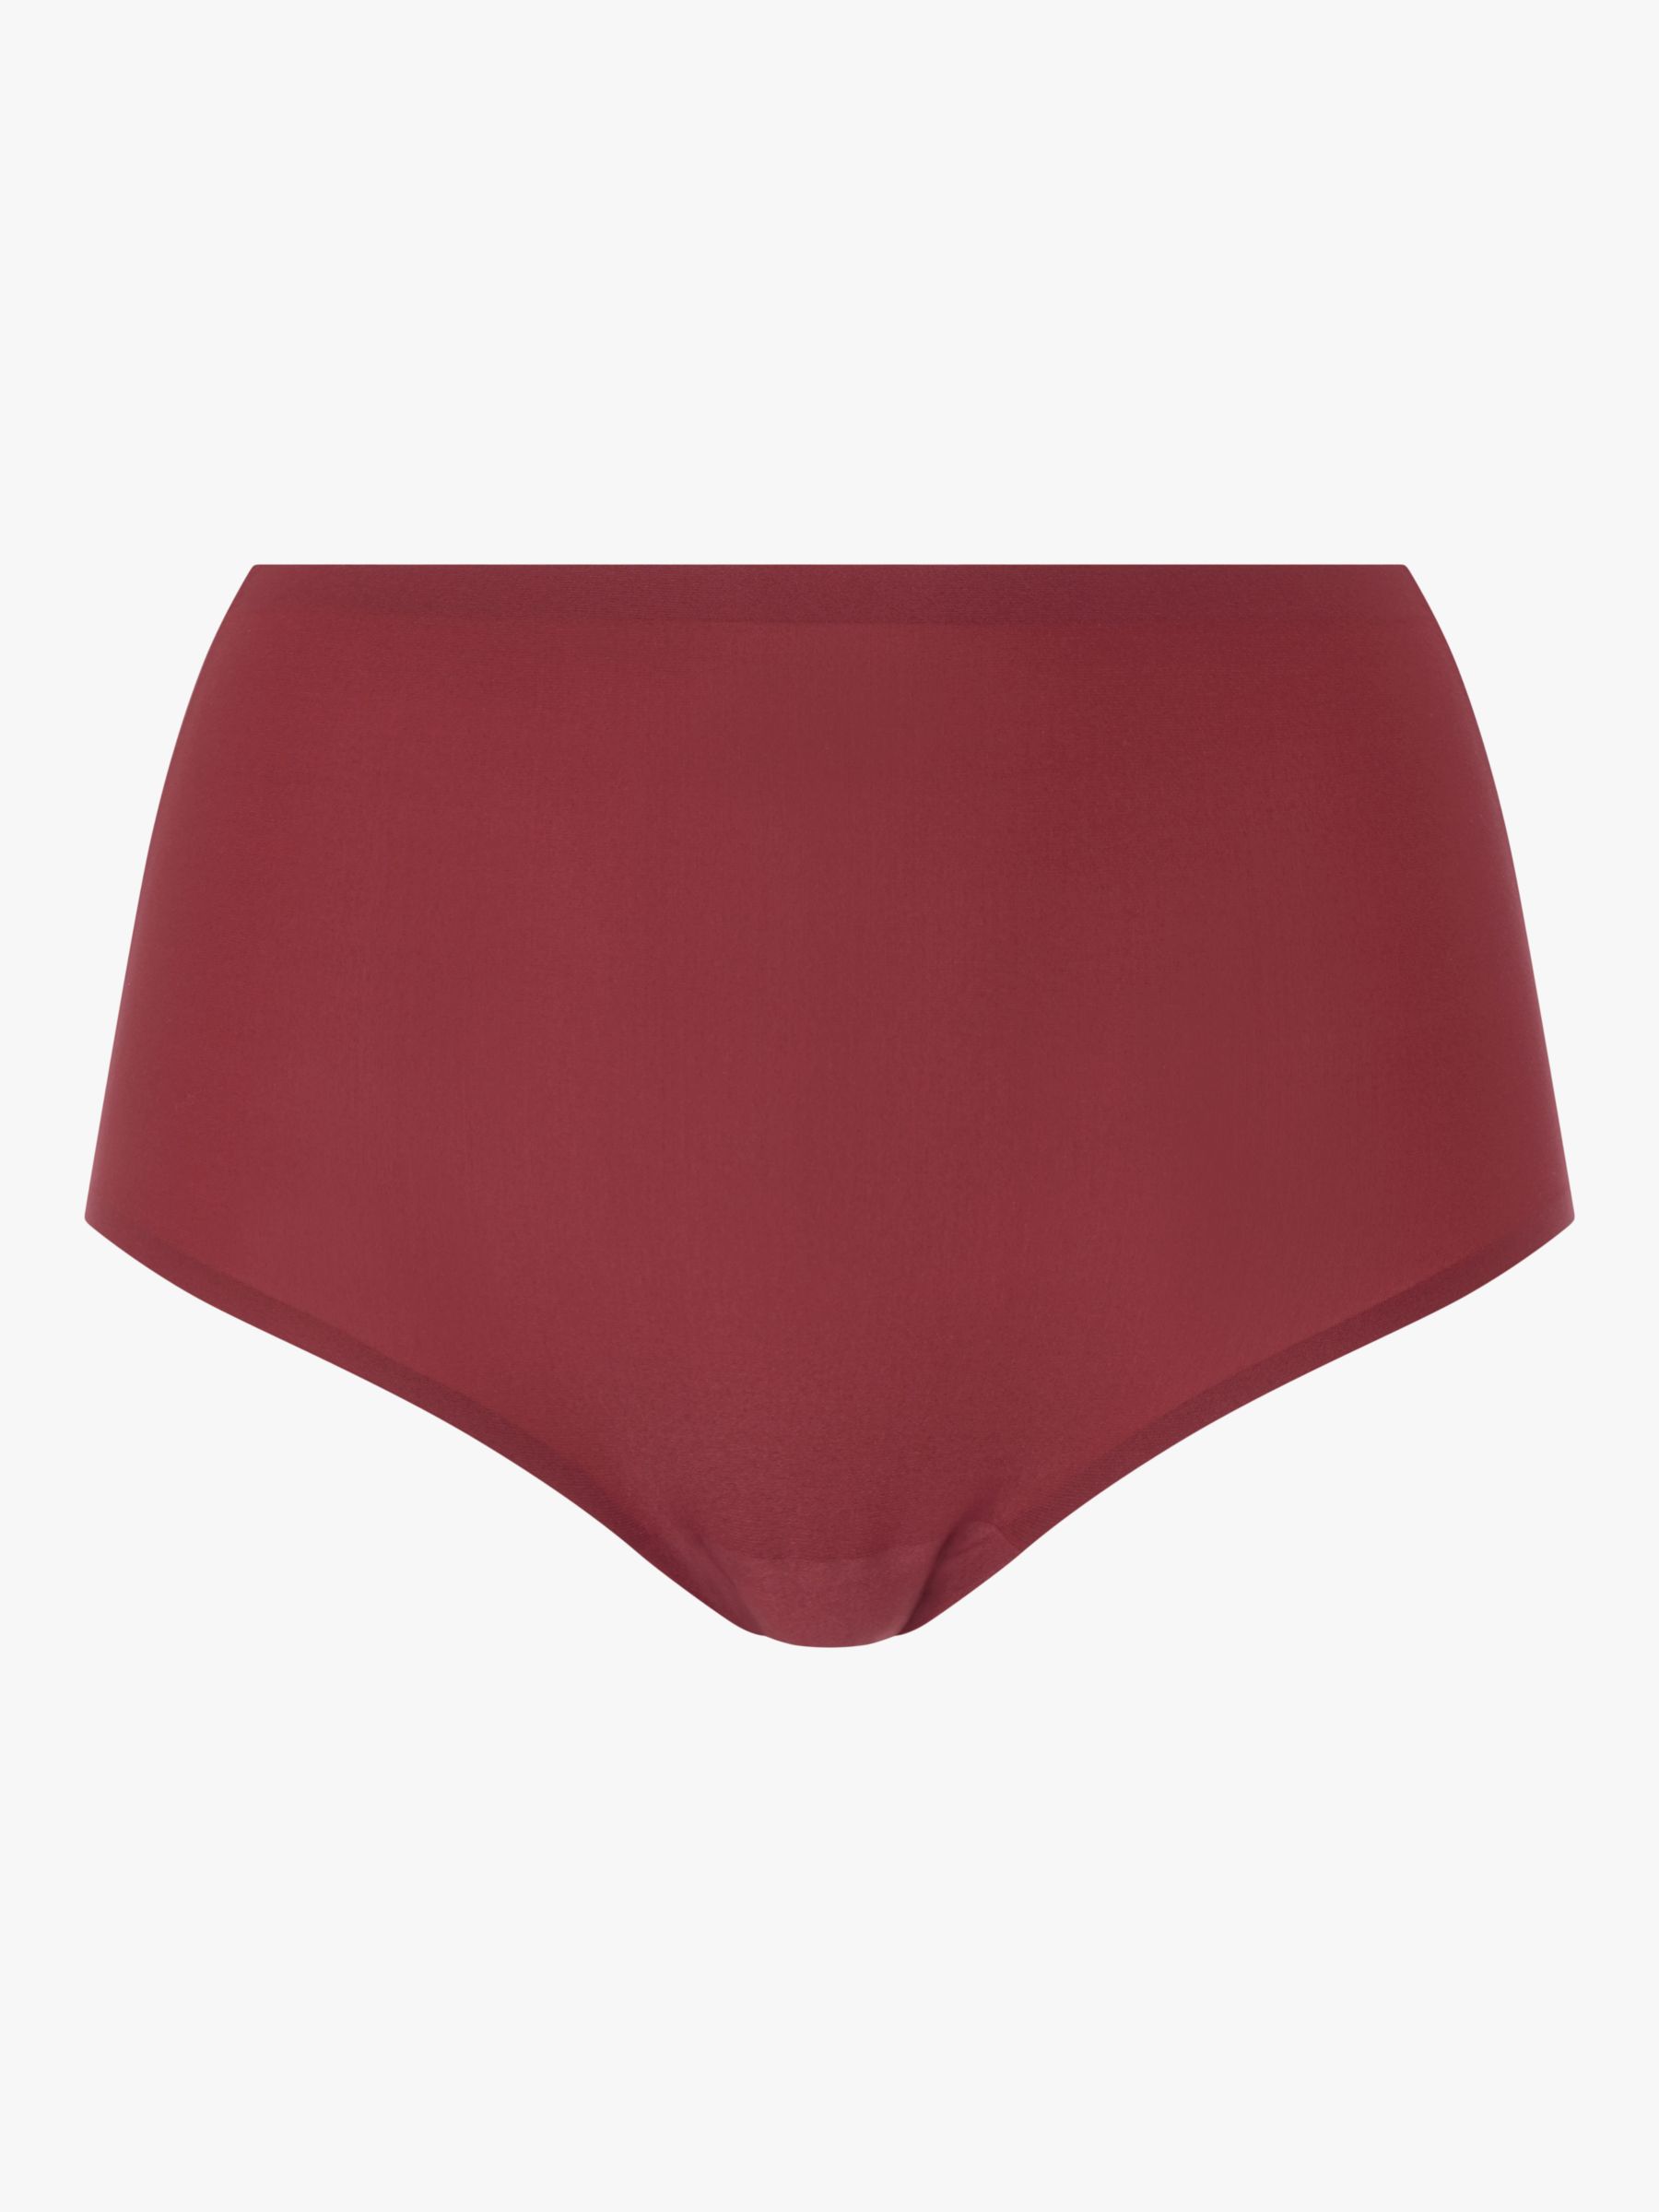 Chantelle Soft Stretch High Waisted Knickers, Mahogany, One Size